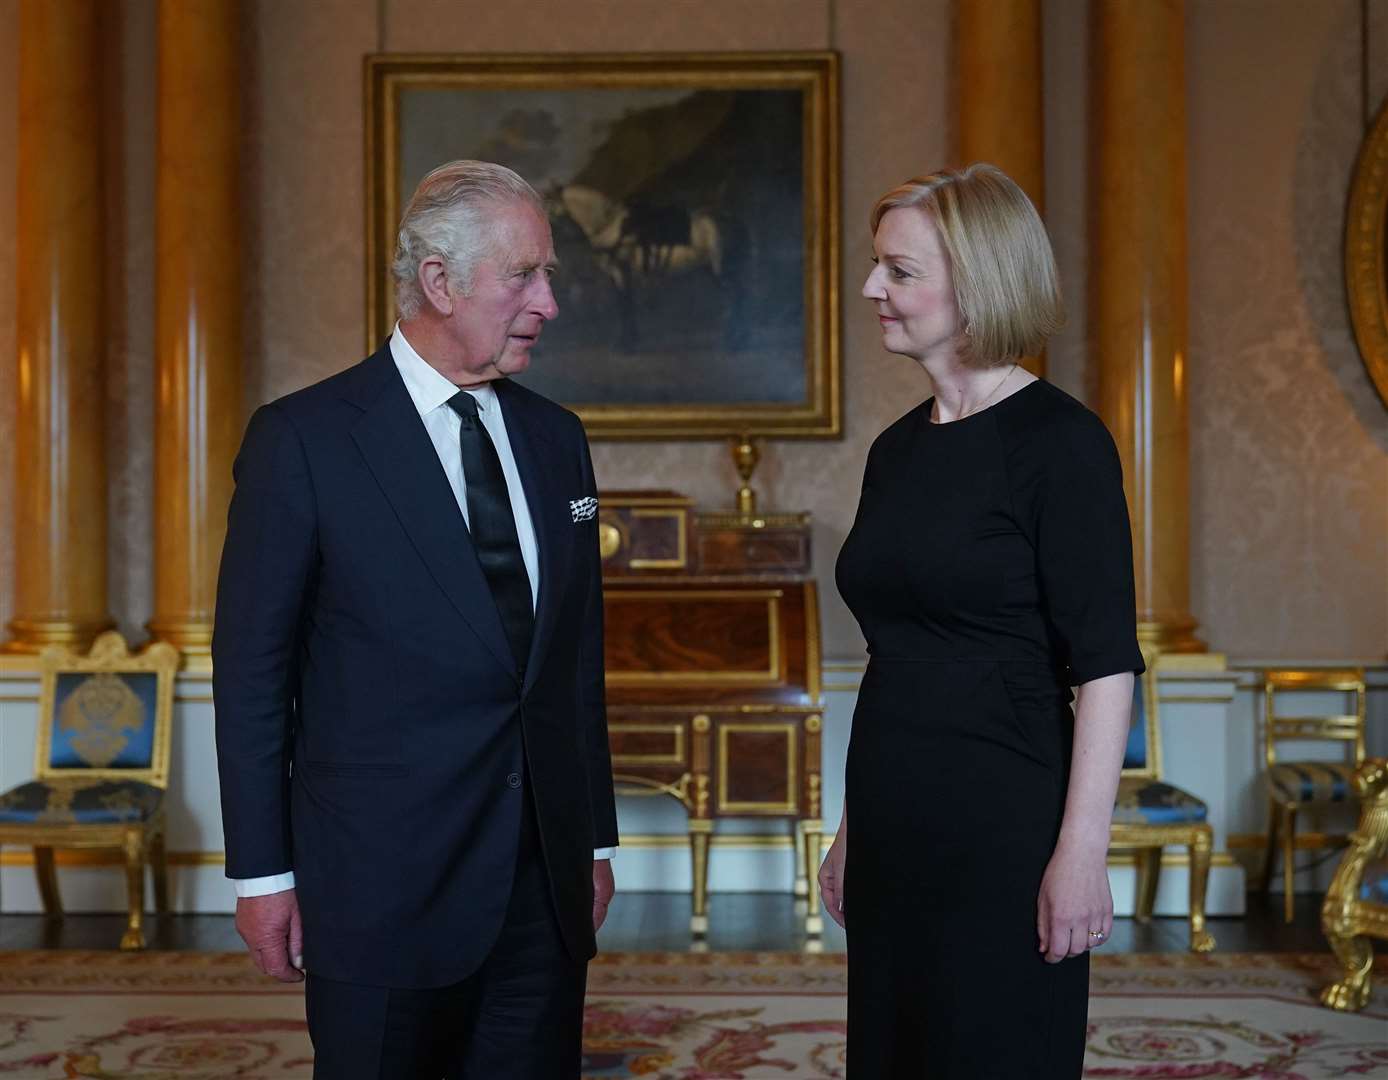 King Charles III during his first audience with Prime Minister Liz Truss (Yui Mok/PA)